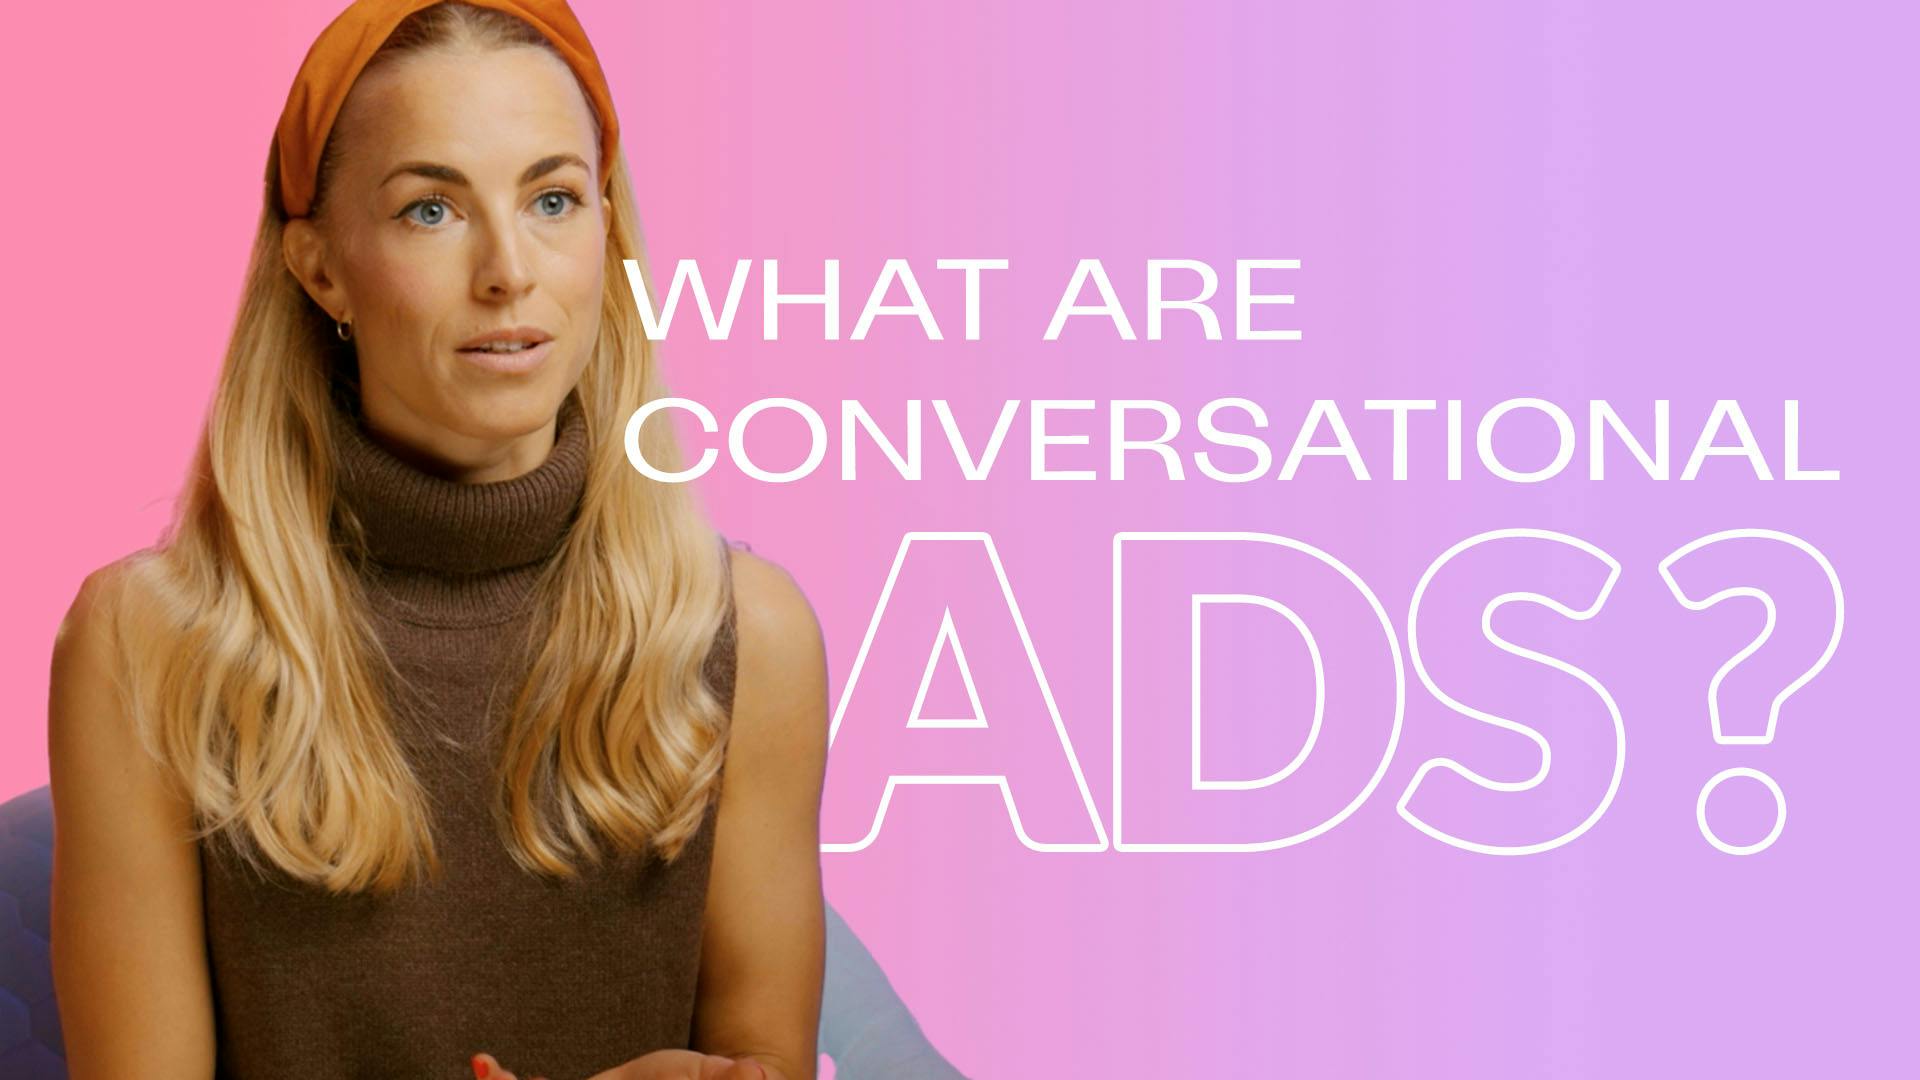 What are conversational ads?